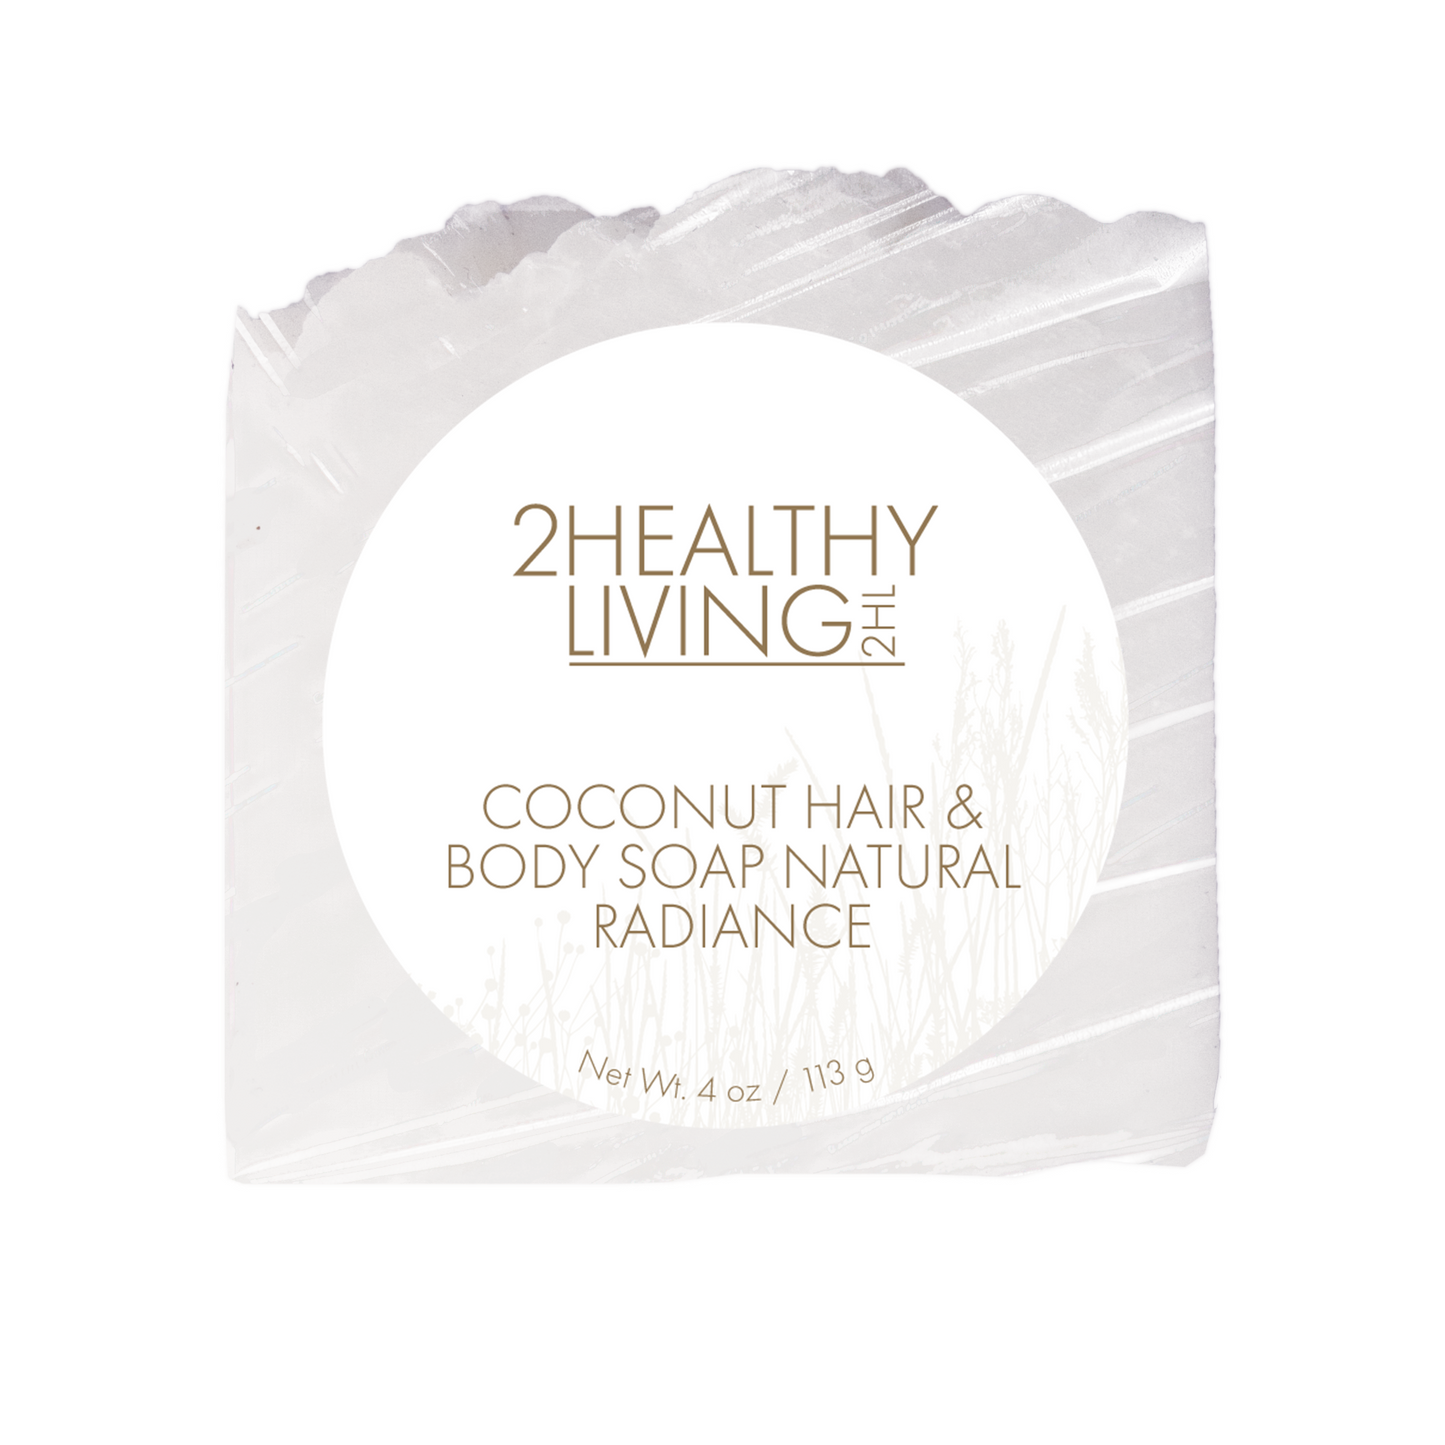 Coconut Hair & Body Soap Natural Radiance